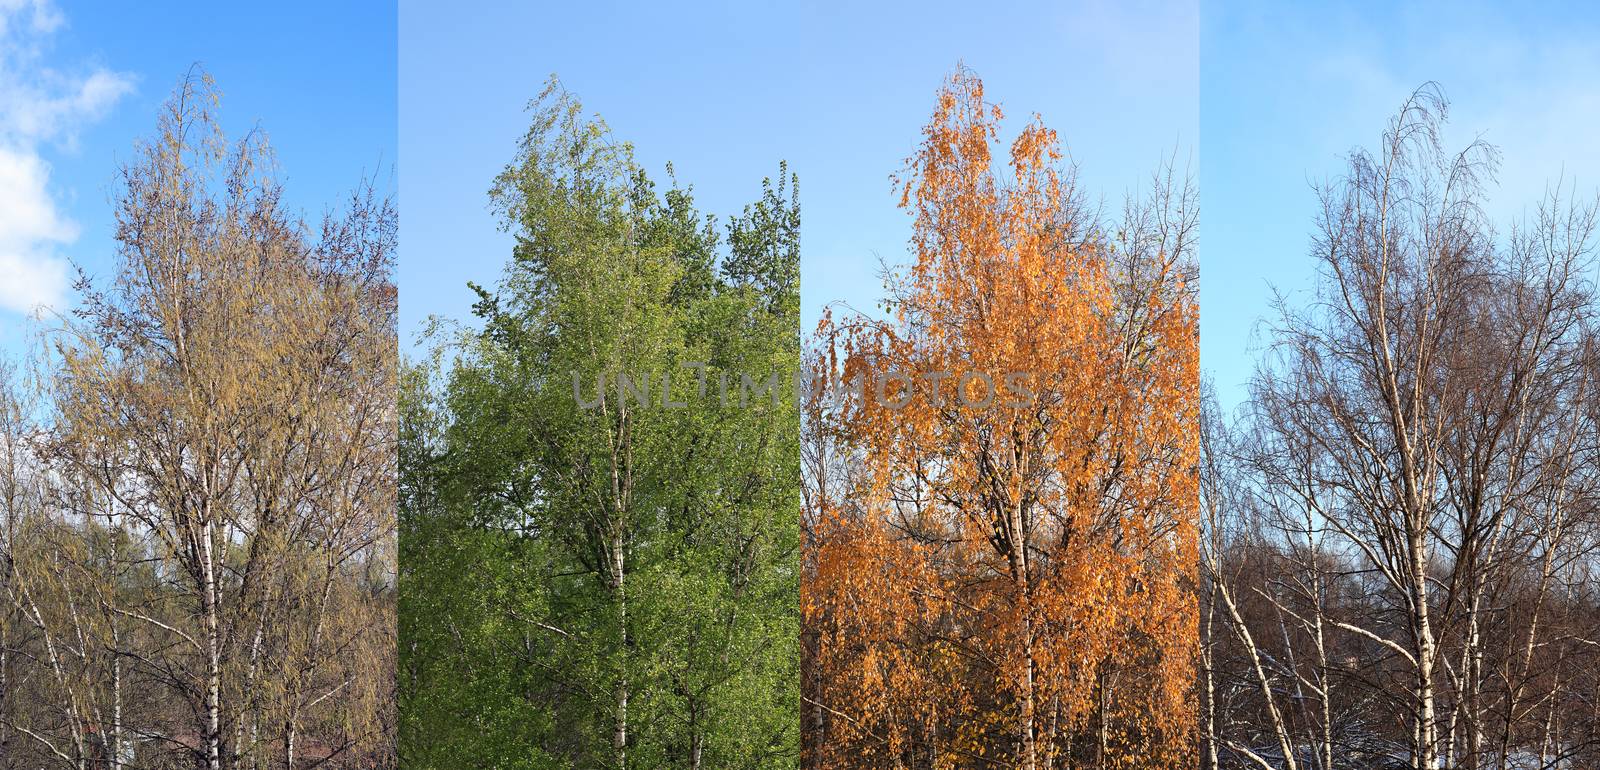 Four Seasons. One birch tree at four seasons of year